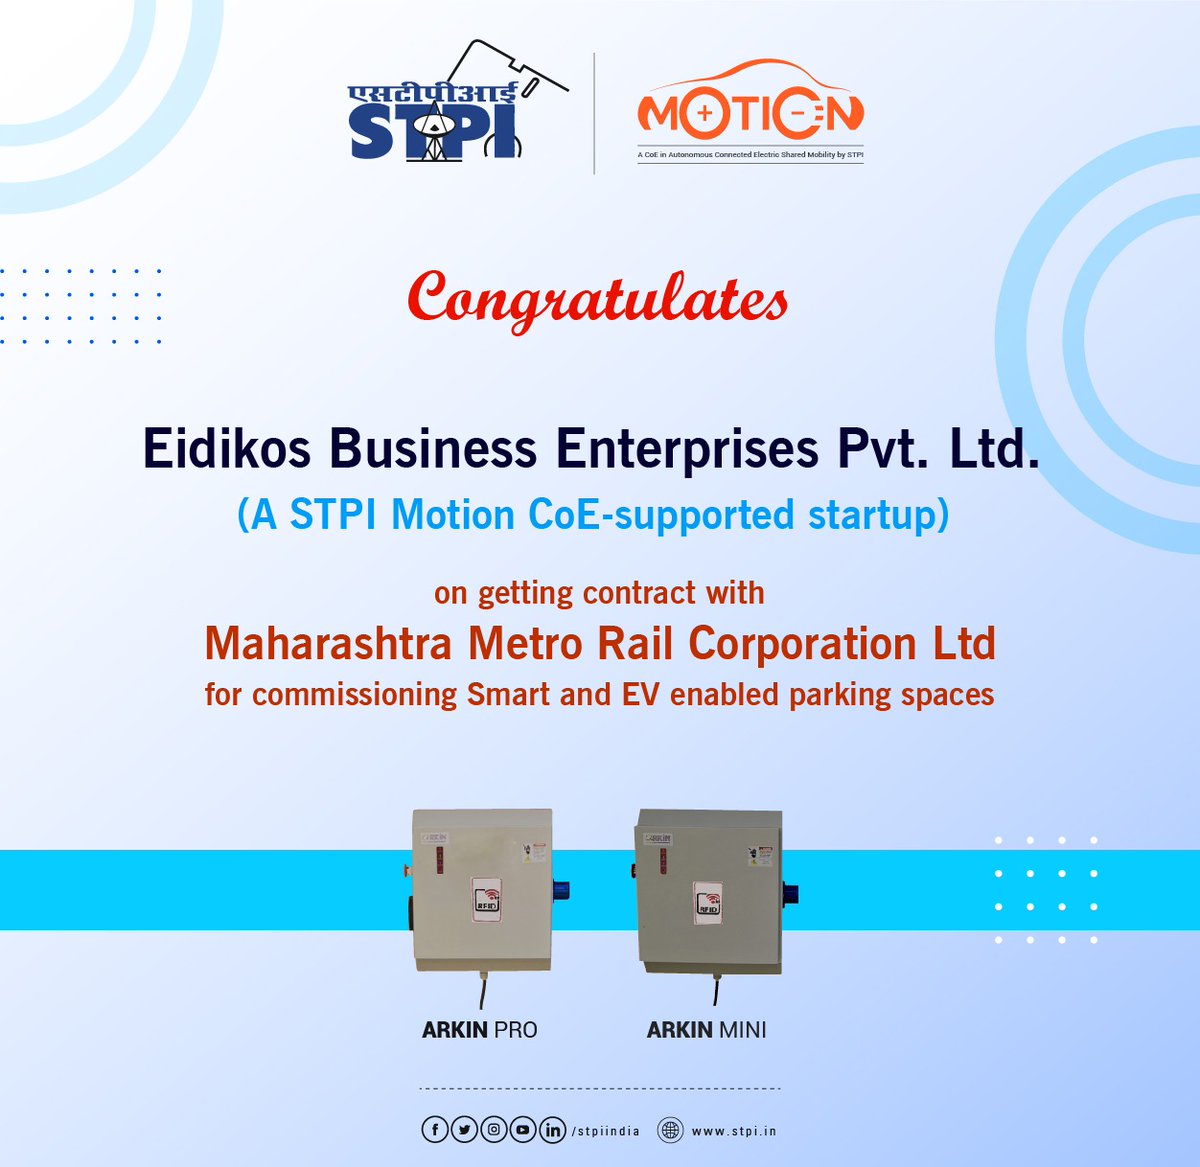 @STPI_MOTION CoE-supported startup M/s Eidikos Business Enterprises Pvt Ltd has been awarded a contract from Maha Mumbai Metro Operation Corporation Ltd for a turnkey project to commission Smart & EV-enabled parking spaces at the station premises.